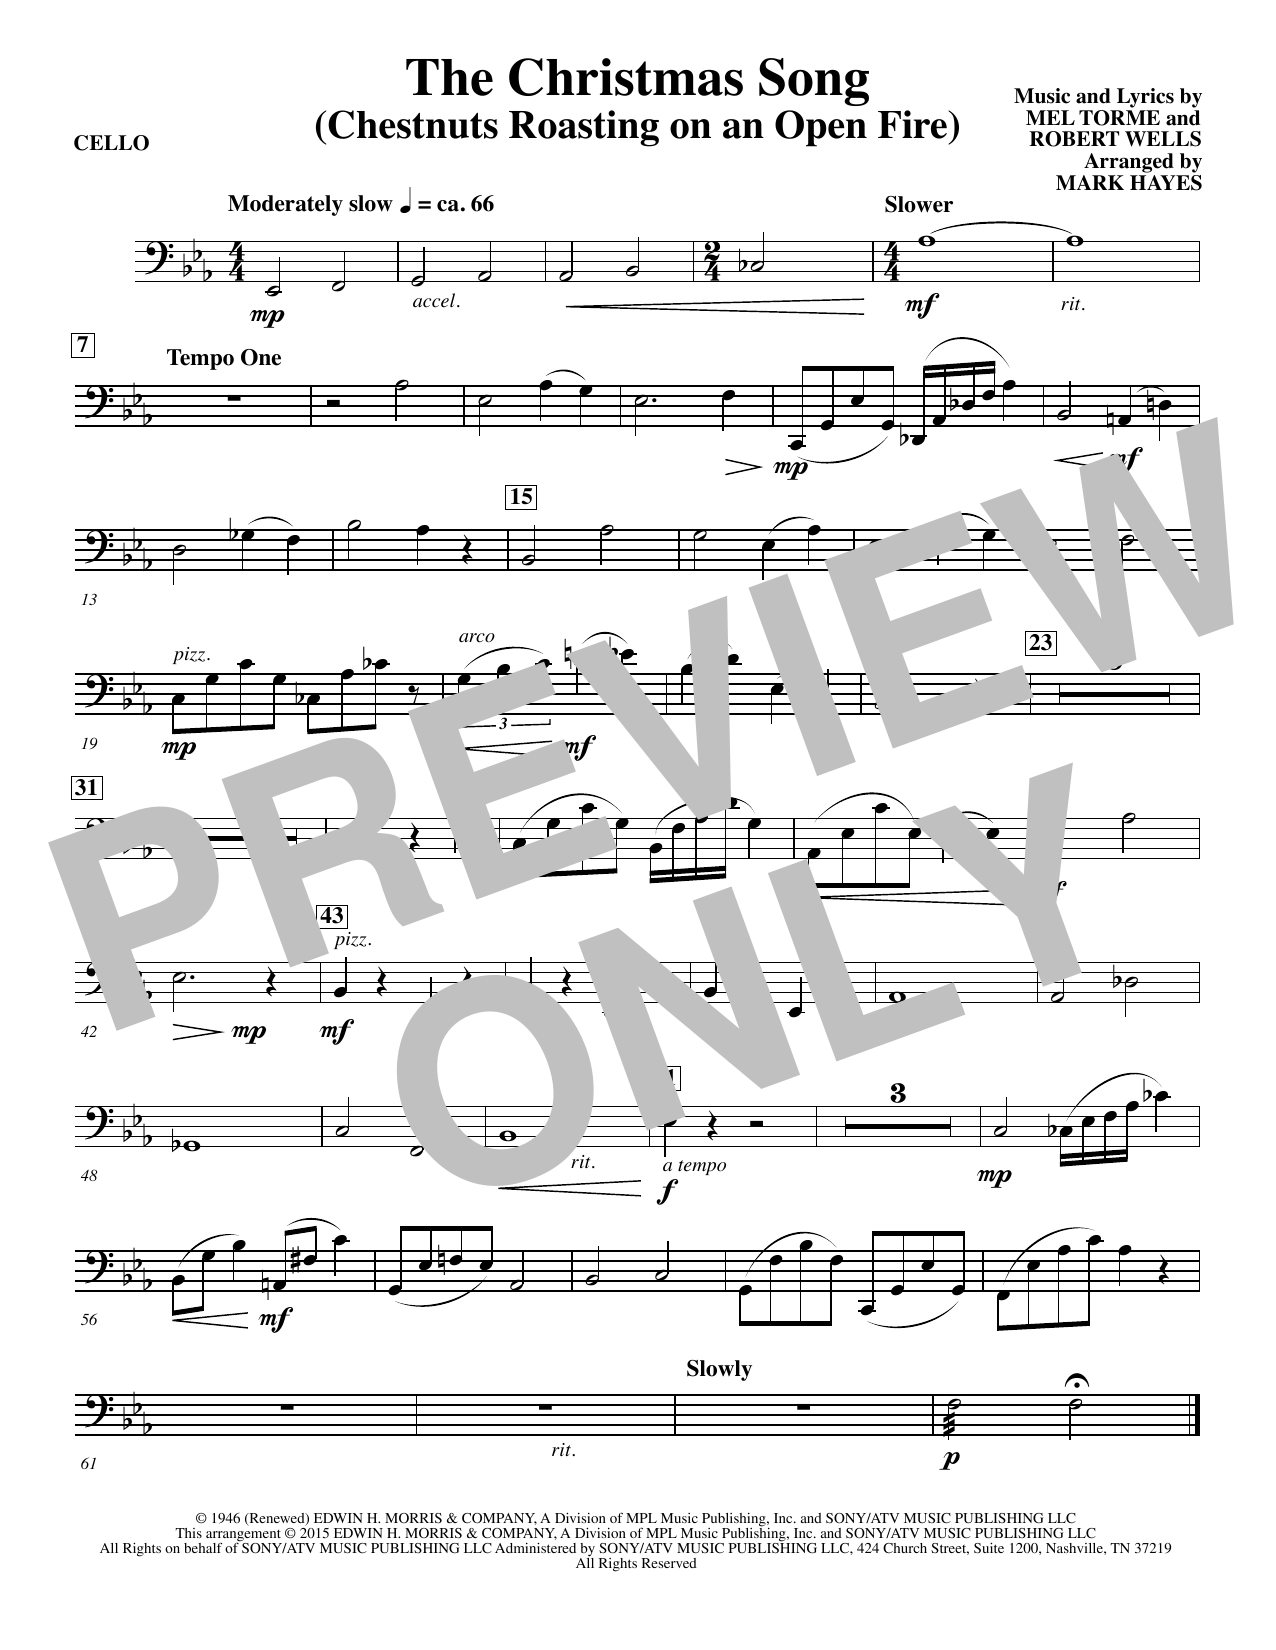 Mel Torme The Christmas Song (Chestnuts Roasting On An Open Fire) - Cello sheet music notes and chords. Download Printable PDF.